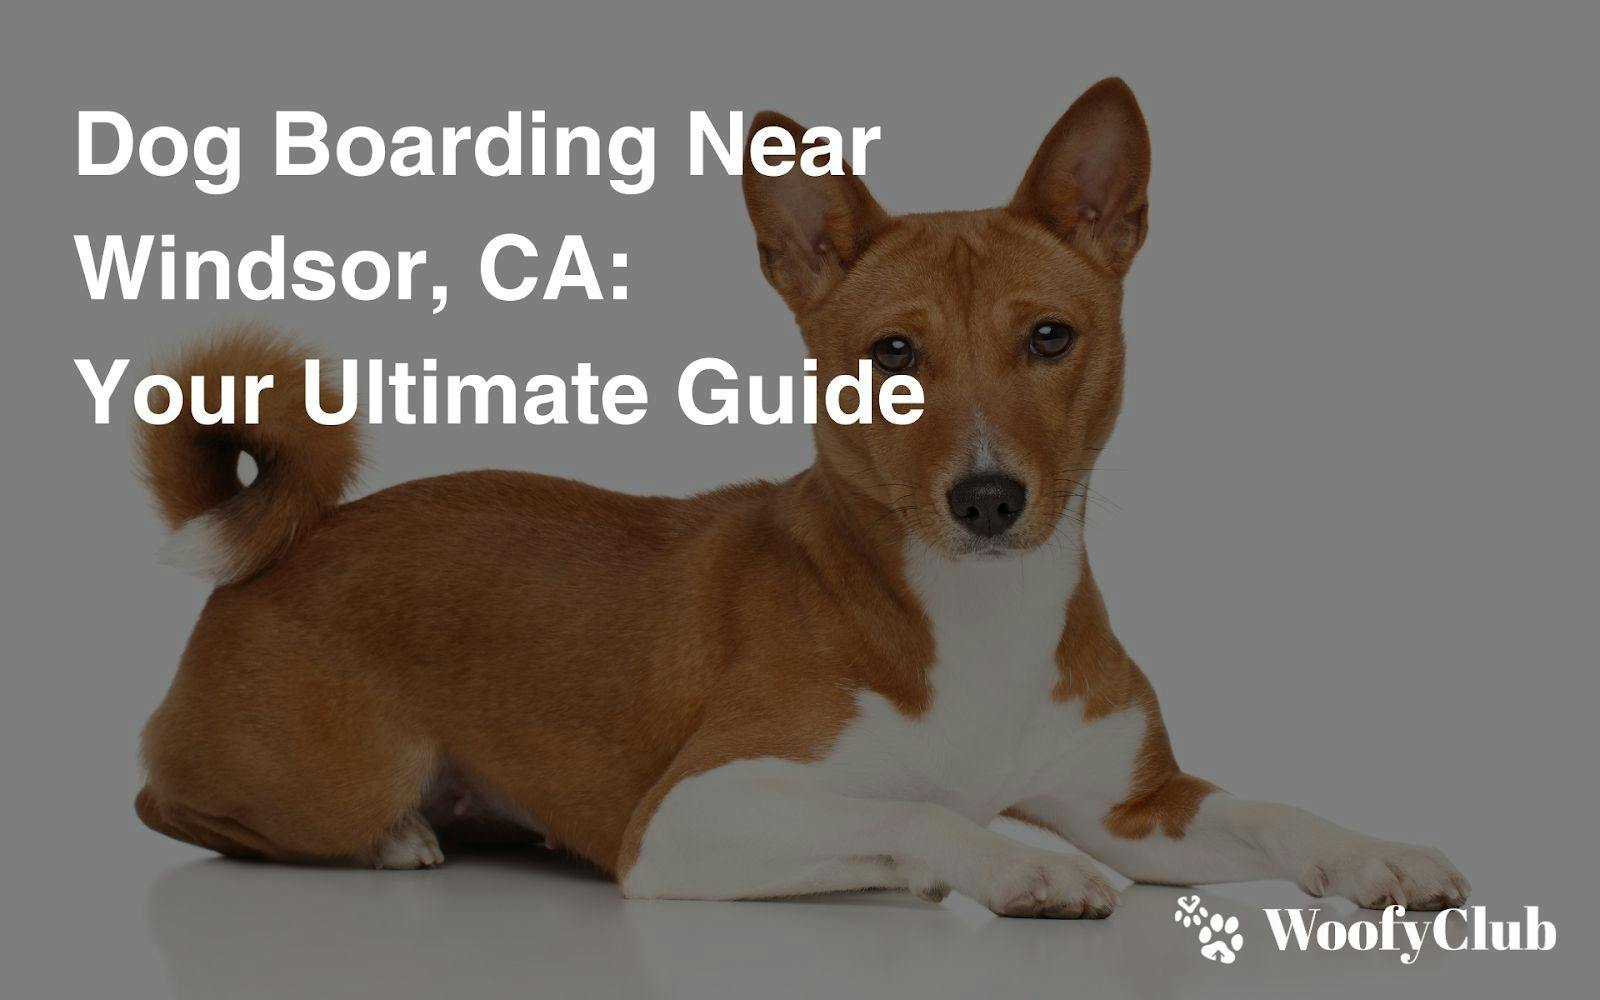 Dog Boarding Near Windsor, CA: Your Ultimate Guide